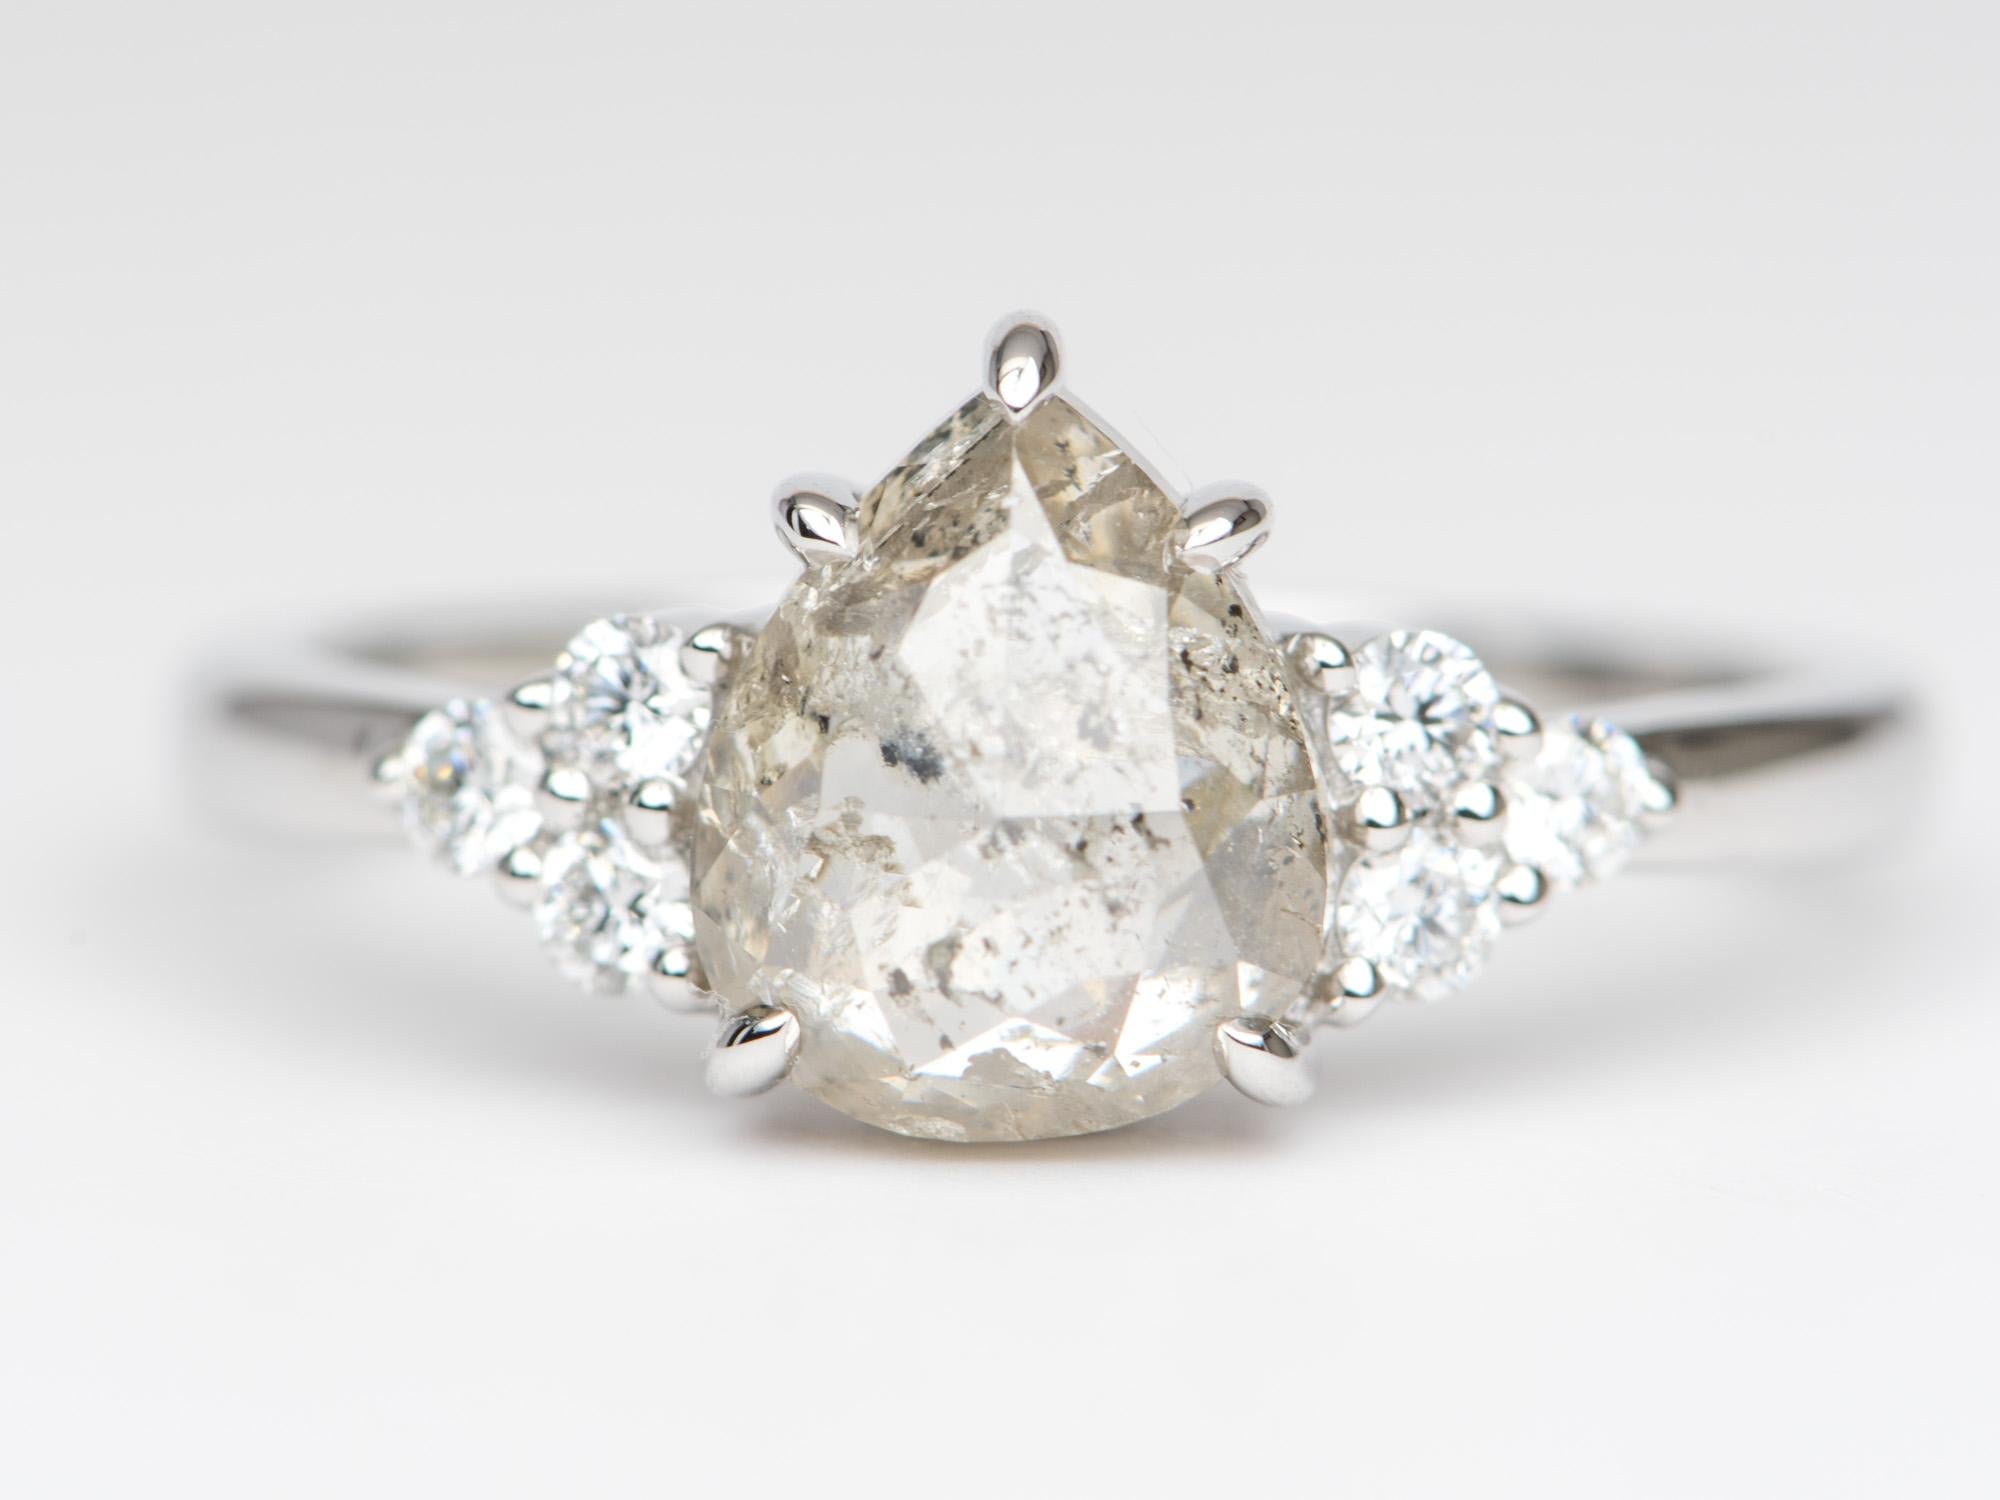 ♥ A clear celestial pear-shaped diamond with trio diamond sides
♥ Solid 14k white gold ring set with a beautiful pear-shaped diamond

♥ US Size 7 (Free resizing up or down 1 size)
♥ Gemstone: Diamond, 1.61ct; diamond, 0.17ct
♥ All stone(s) used are